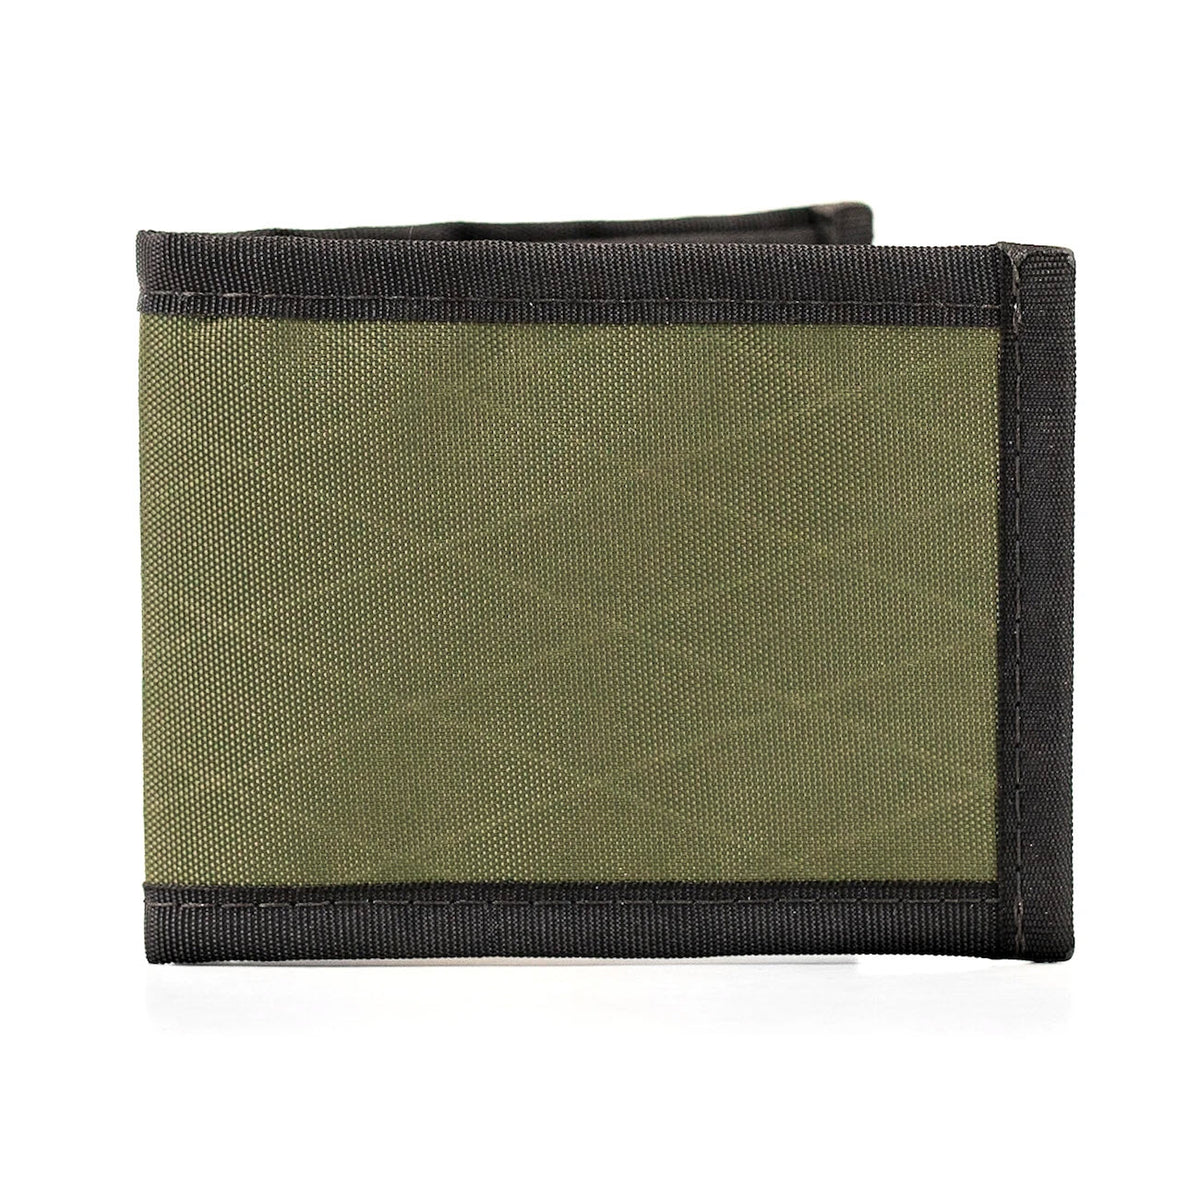 Green Flowfold Vanguard bifold wallet with black trim on a white background.